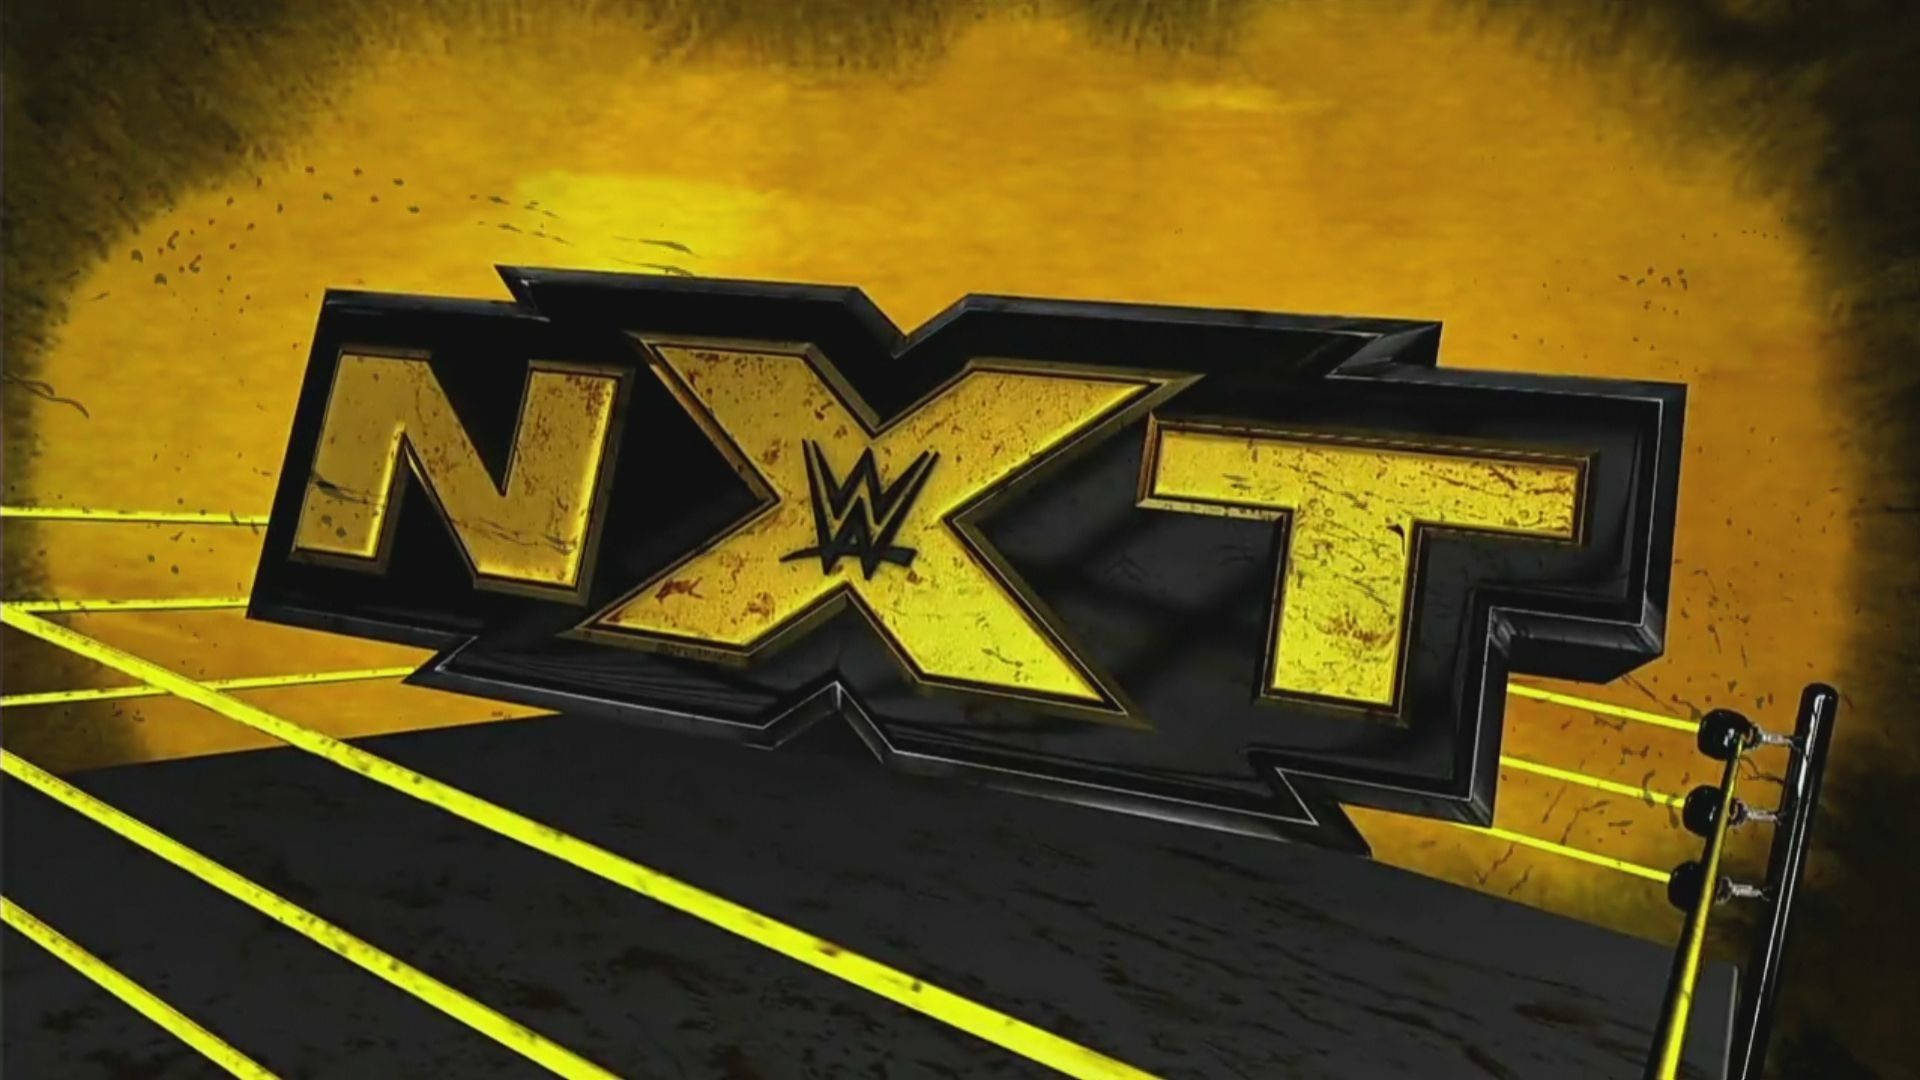 Wwe Nxt Poster Background